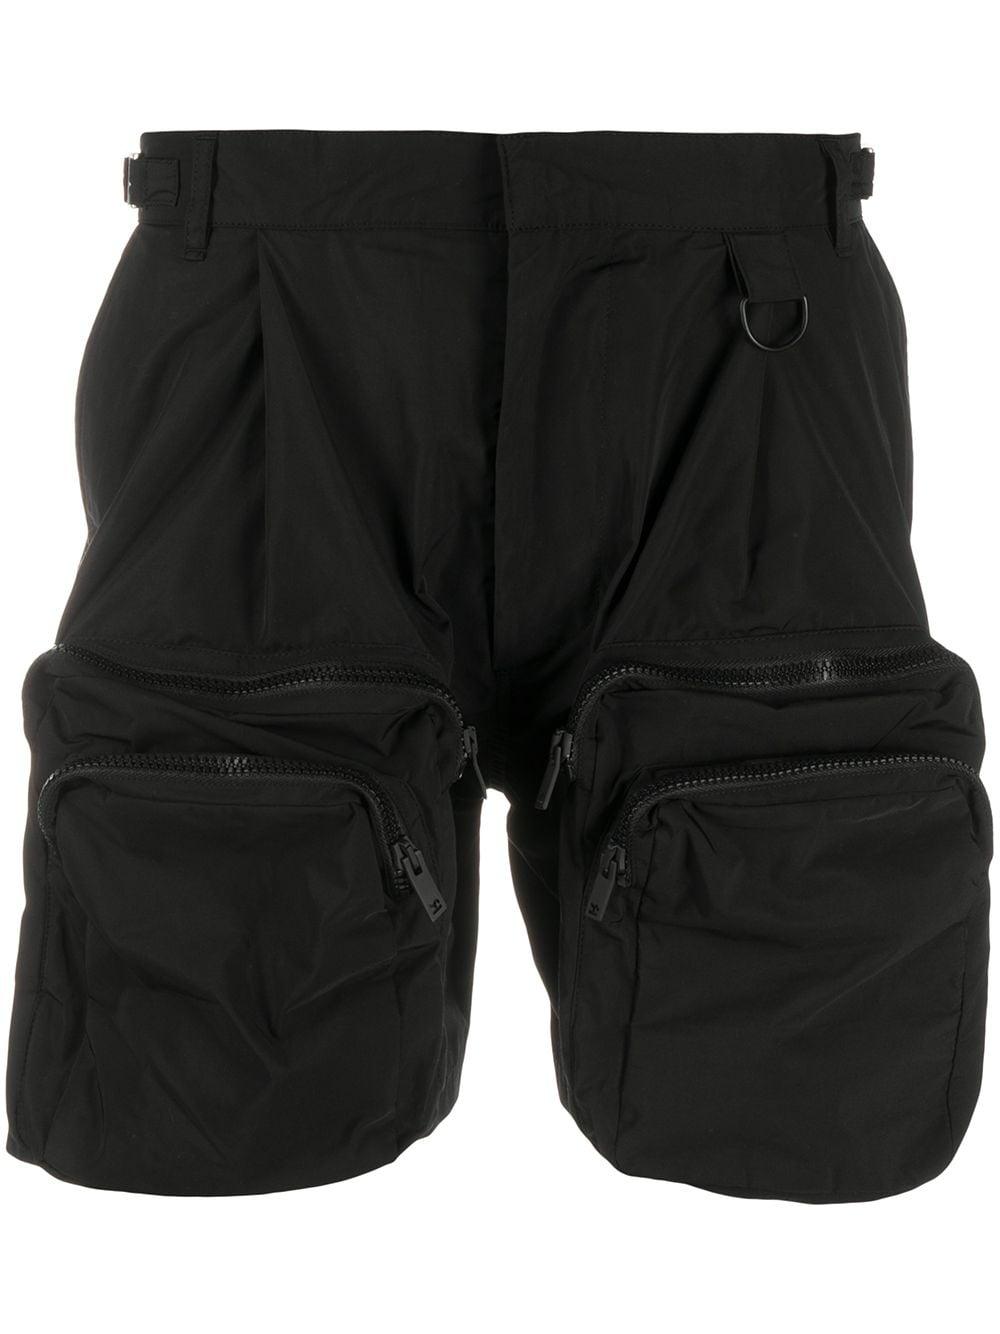 Represent Cotton Zipped Pocket Shorts in Black for Men - Lyst